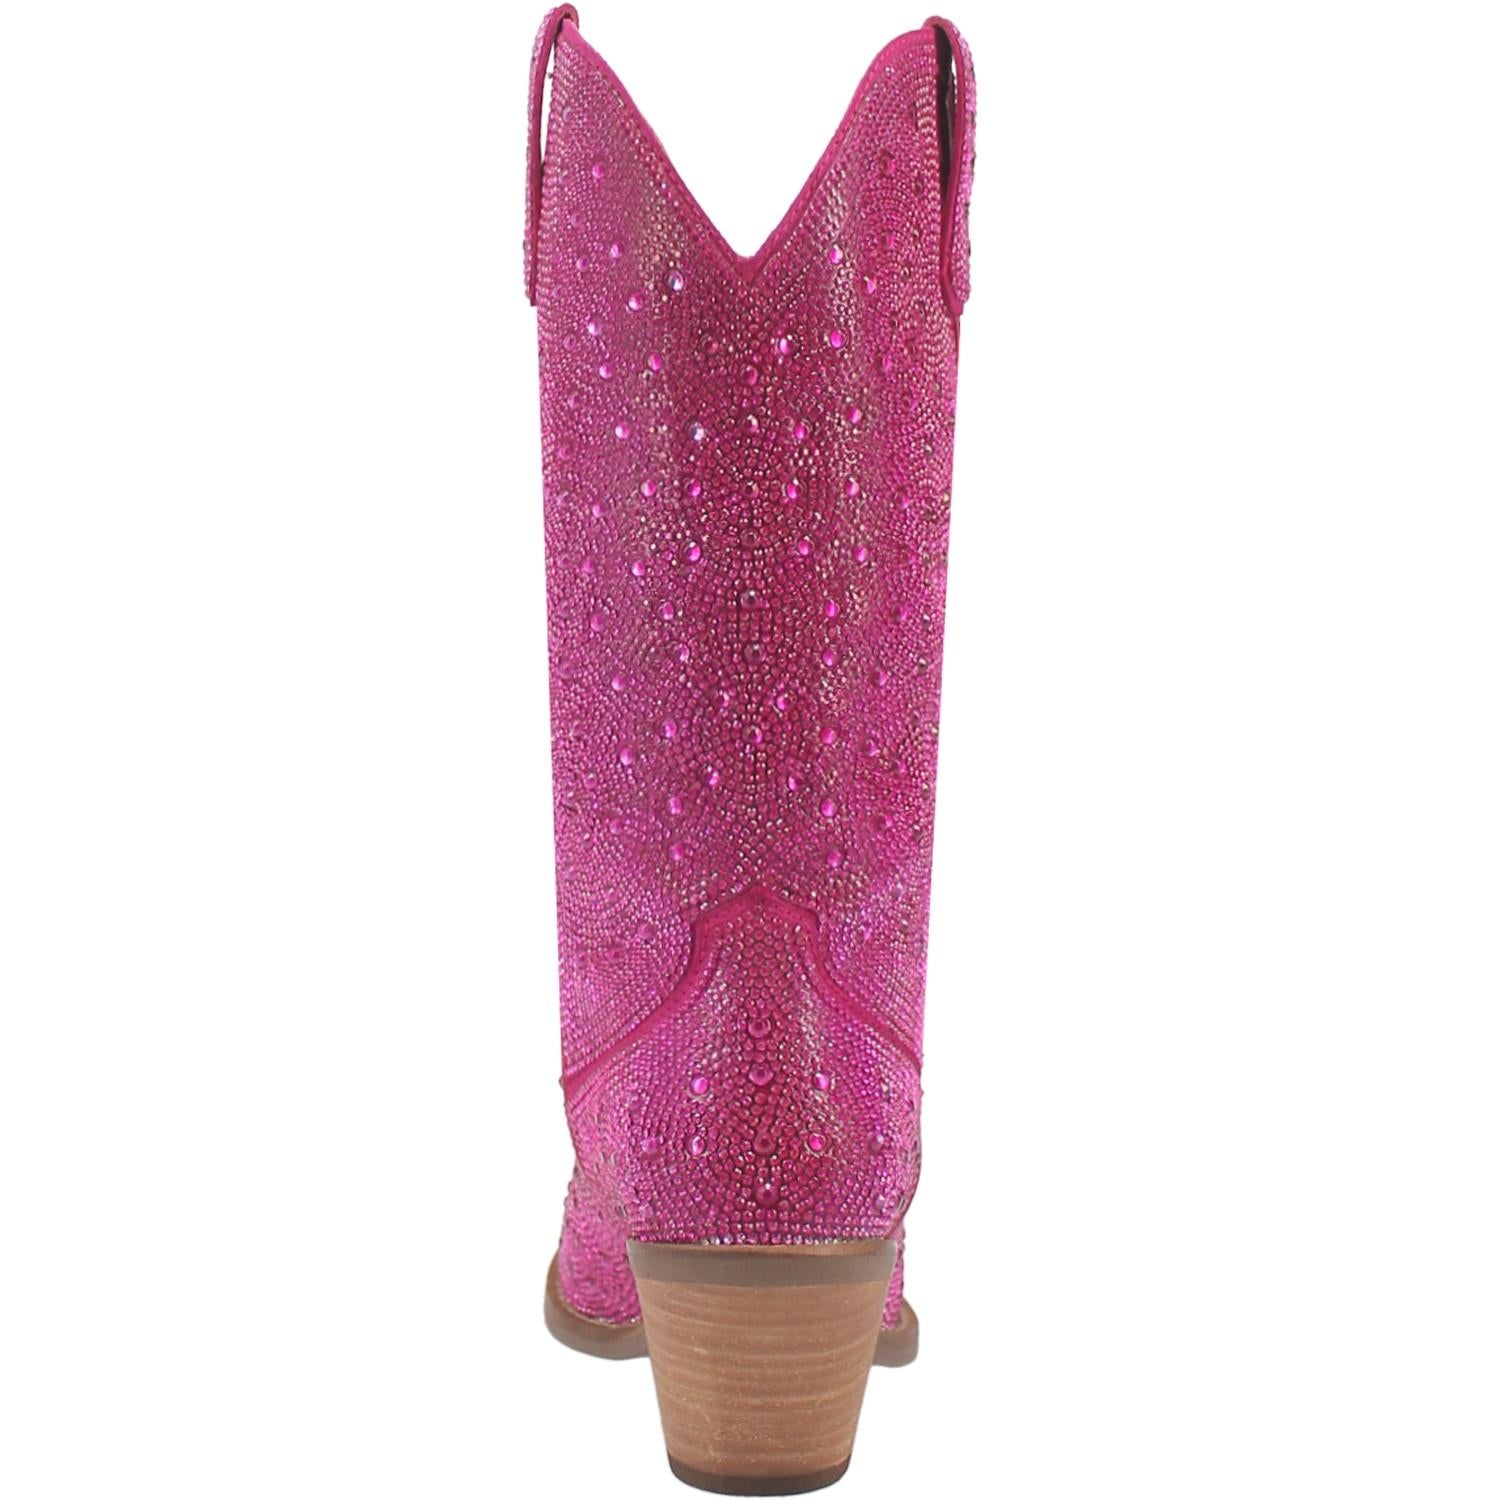 A mid calf length pink boot with rhinestones from top to bottom, matching leather straps, a short heel, and a V cut at the top. Item is pictured on a white background